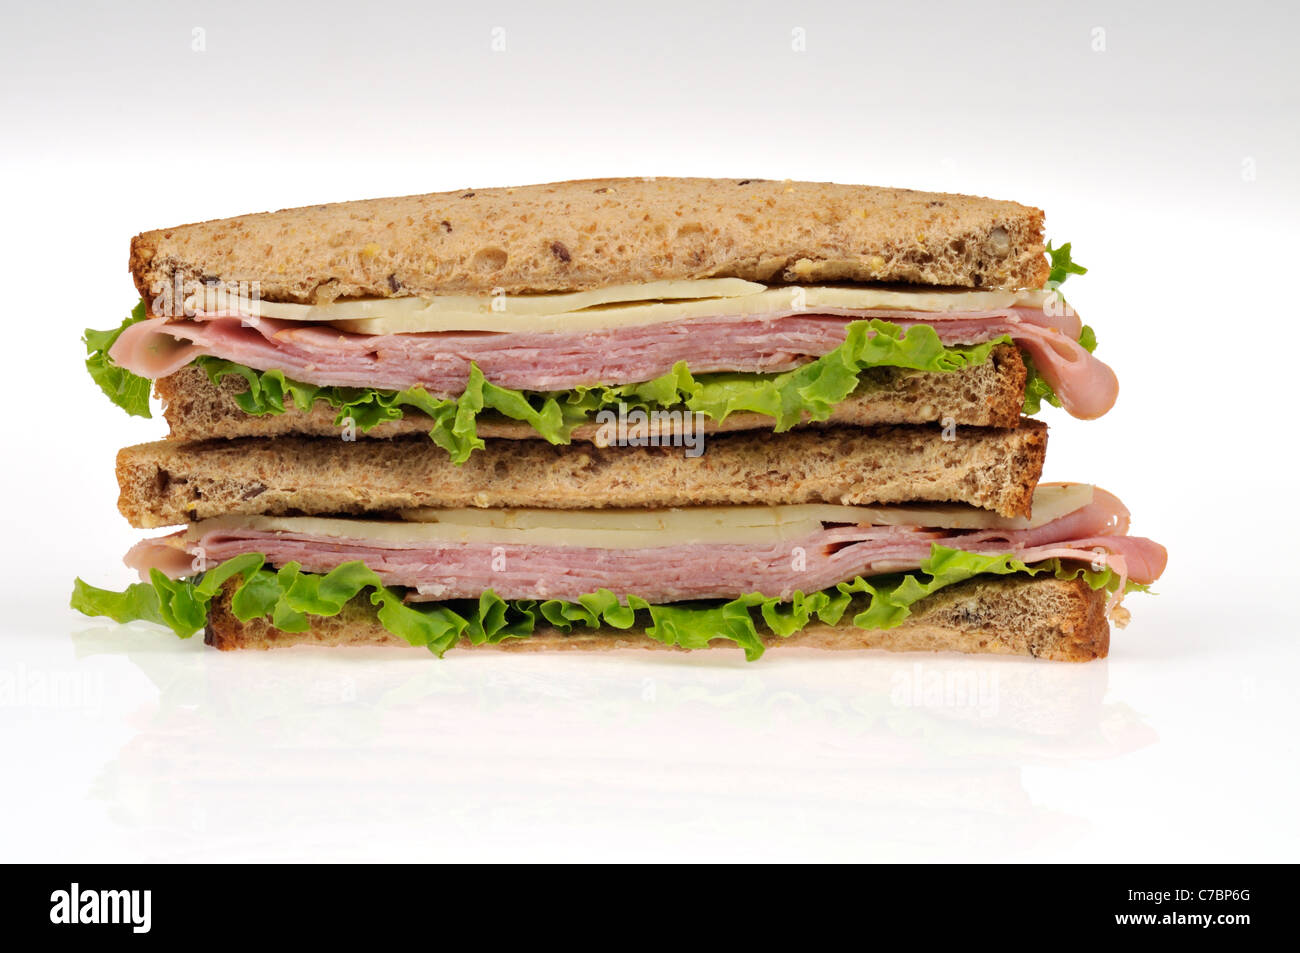 Halves of a ham and cheese sandwich on whole meal bread with lettuce stacked on white background, isolated. Stock Photo